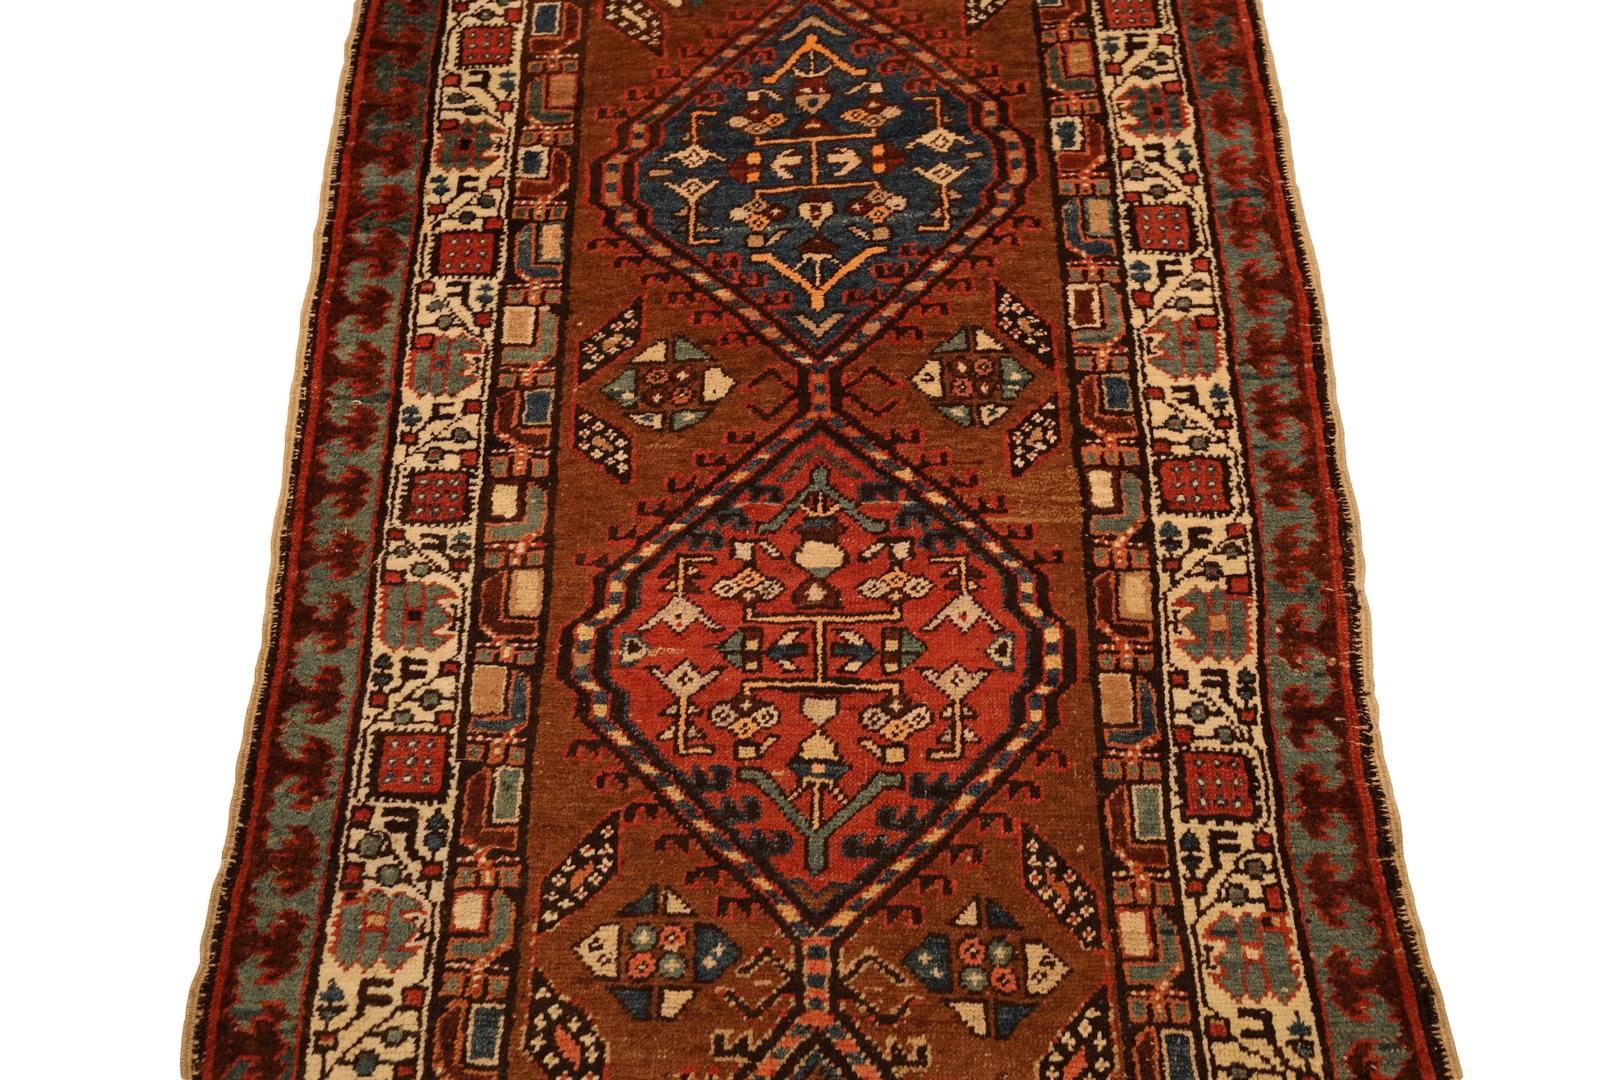 Hand-Knotted Serab Semi-Antique Runner - 3'5